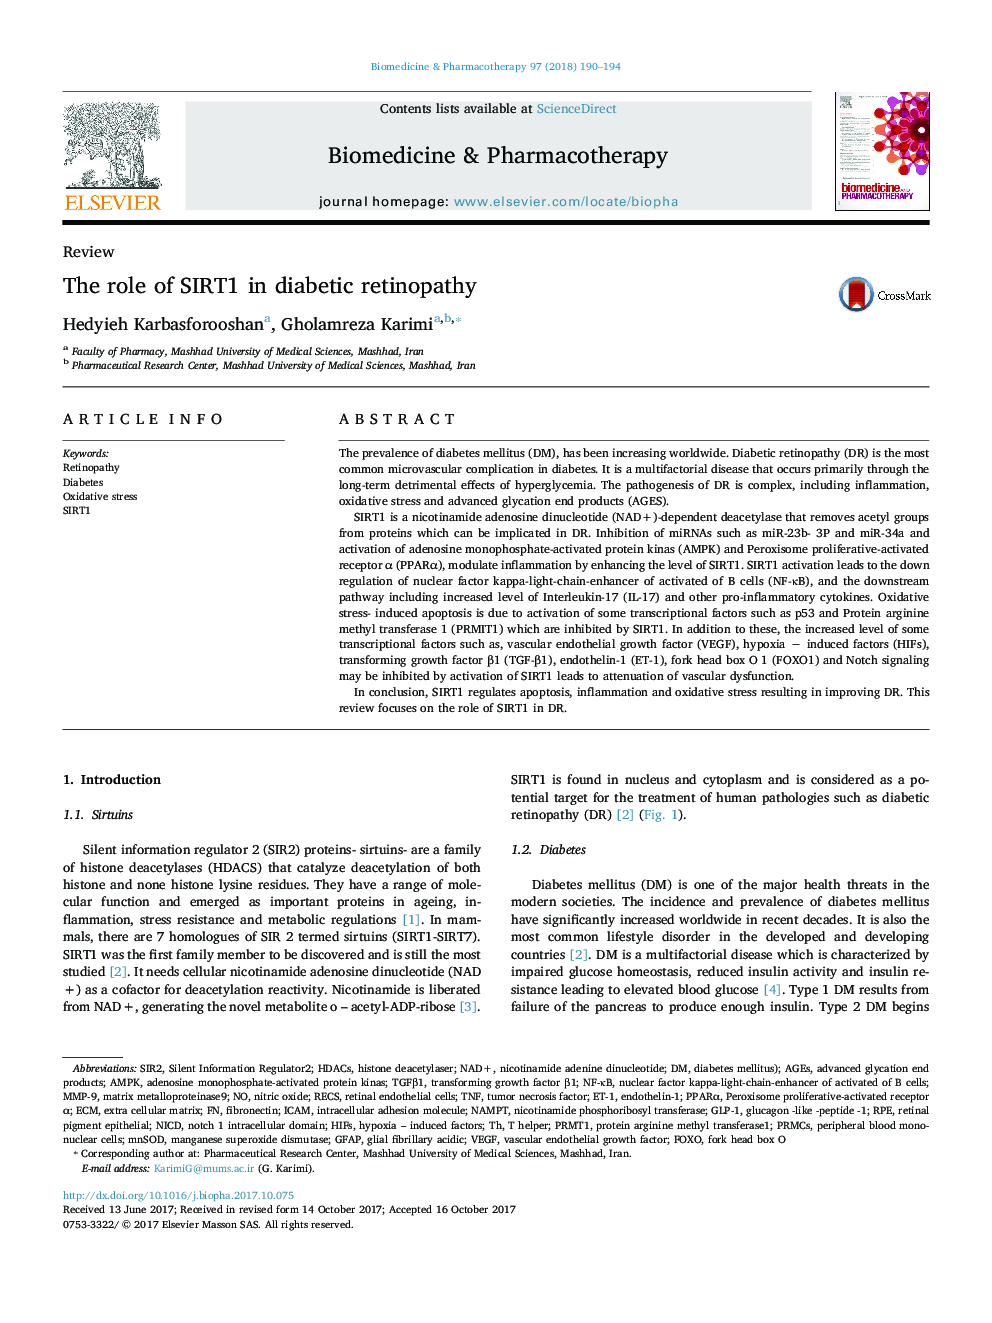 The role of SIRT1 in diabetic retinopathy